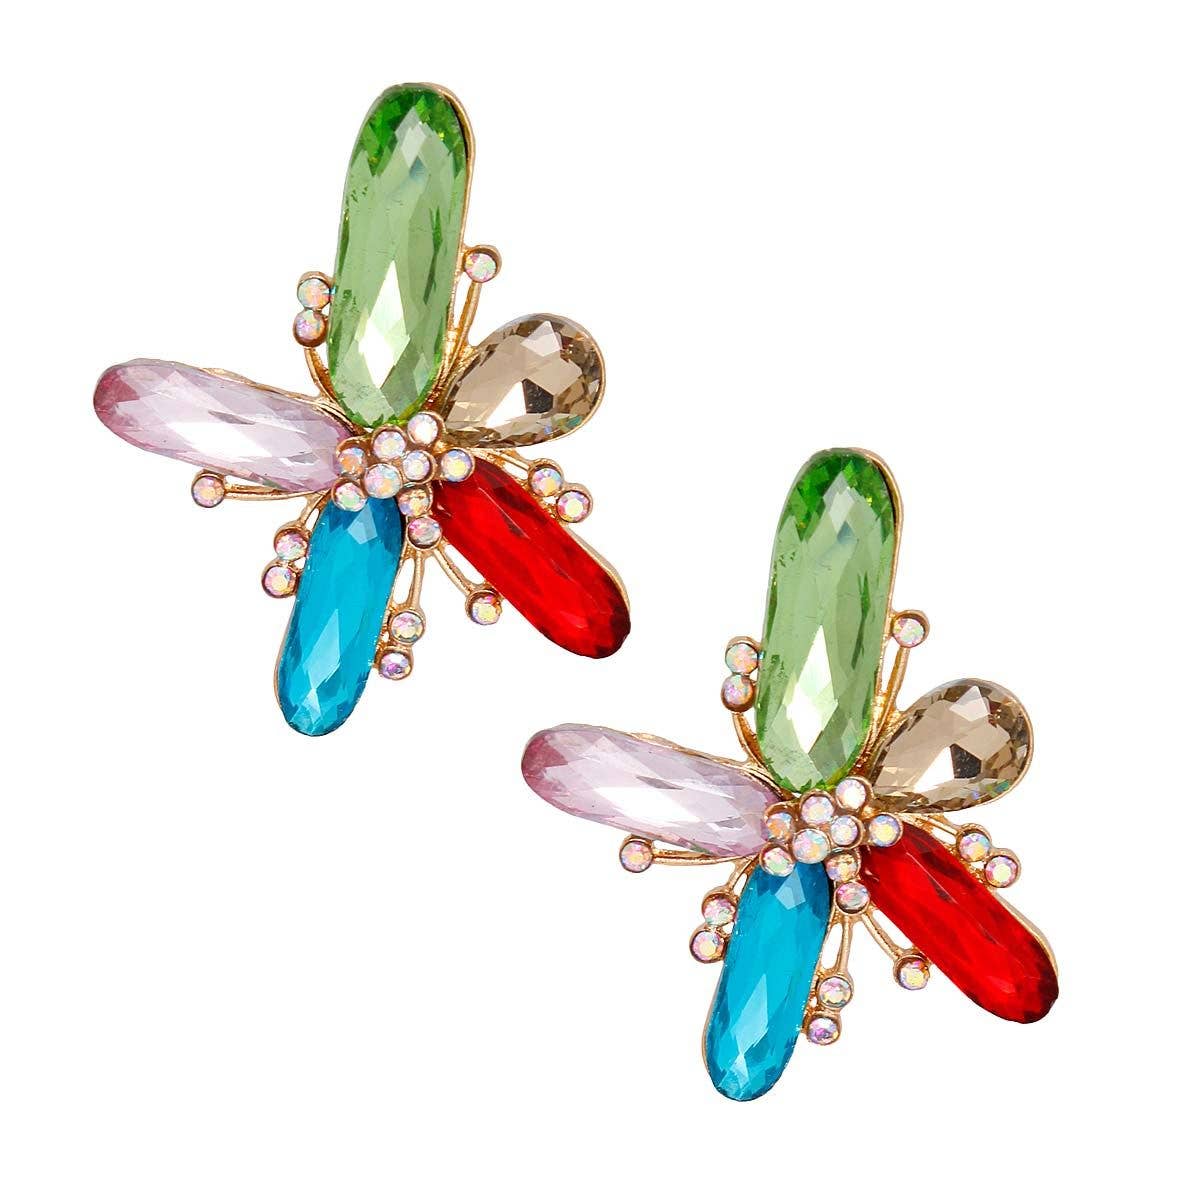 Multi Abstract Flower Studs: 2.15 x 1.65 inches / Multi Color / Gold